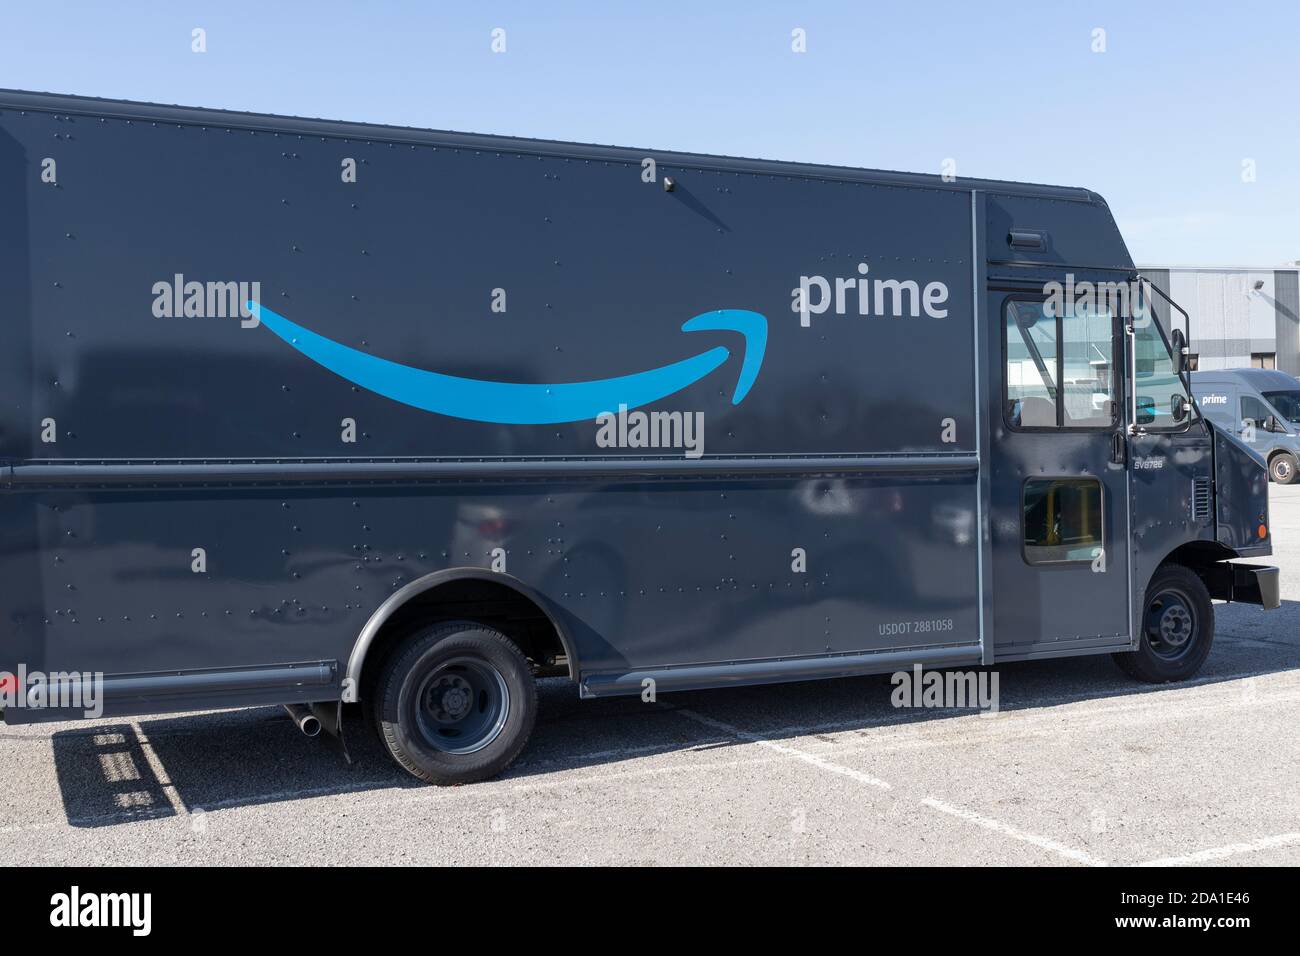 Indianapolis - Circa November 2020: Amazon Prime delivery van. Amazon.com  is getting In the delivery business With Prime branded vans Stock Photo -  Alamy